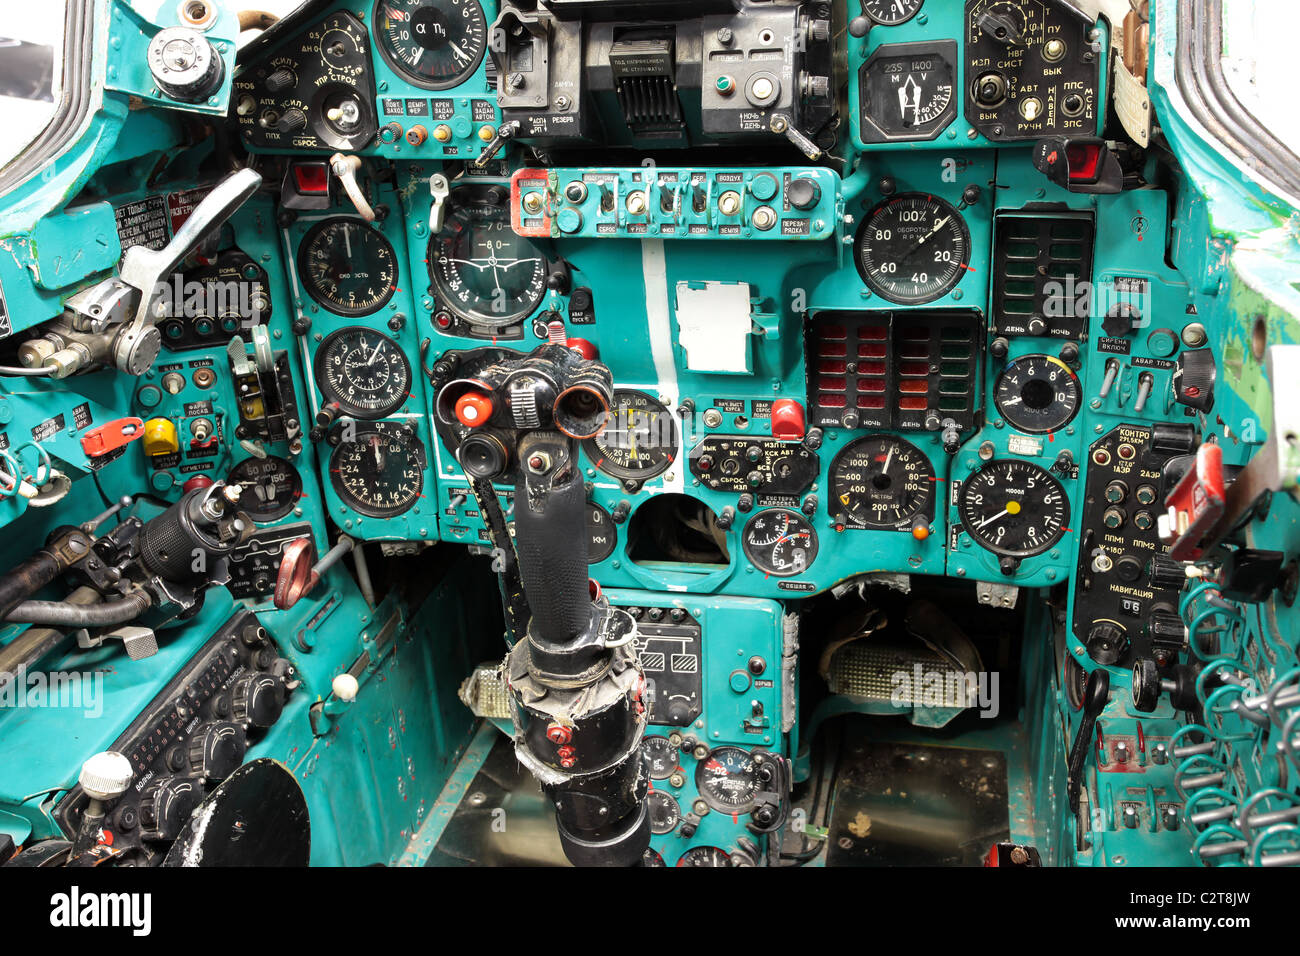 Aircraft cockpit, Mig-23 Flogger Soviet fighter jet. Captured by US Military for exploitation and training. Stock Photo